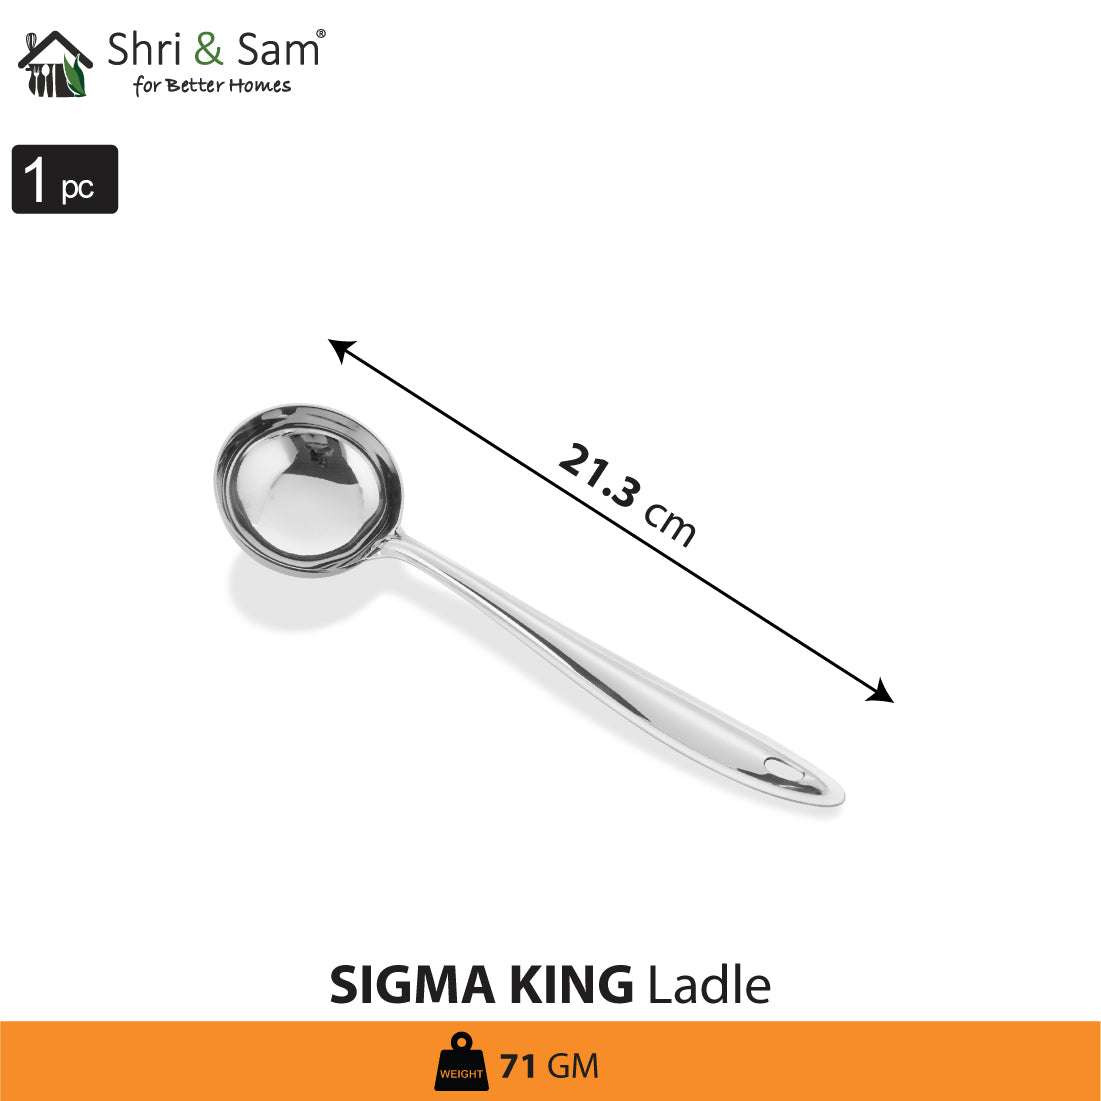 Stainless Steel Ladle Sigma King